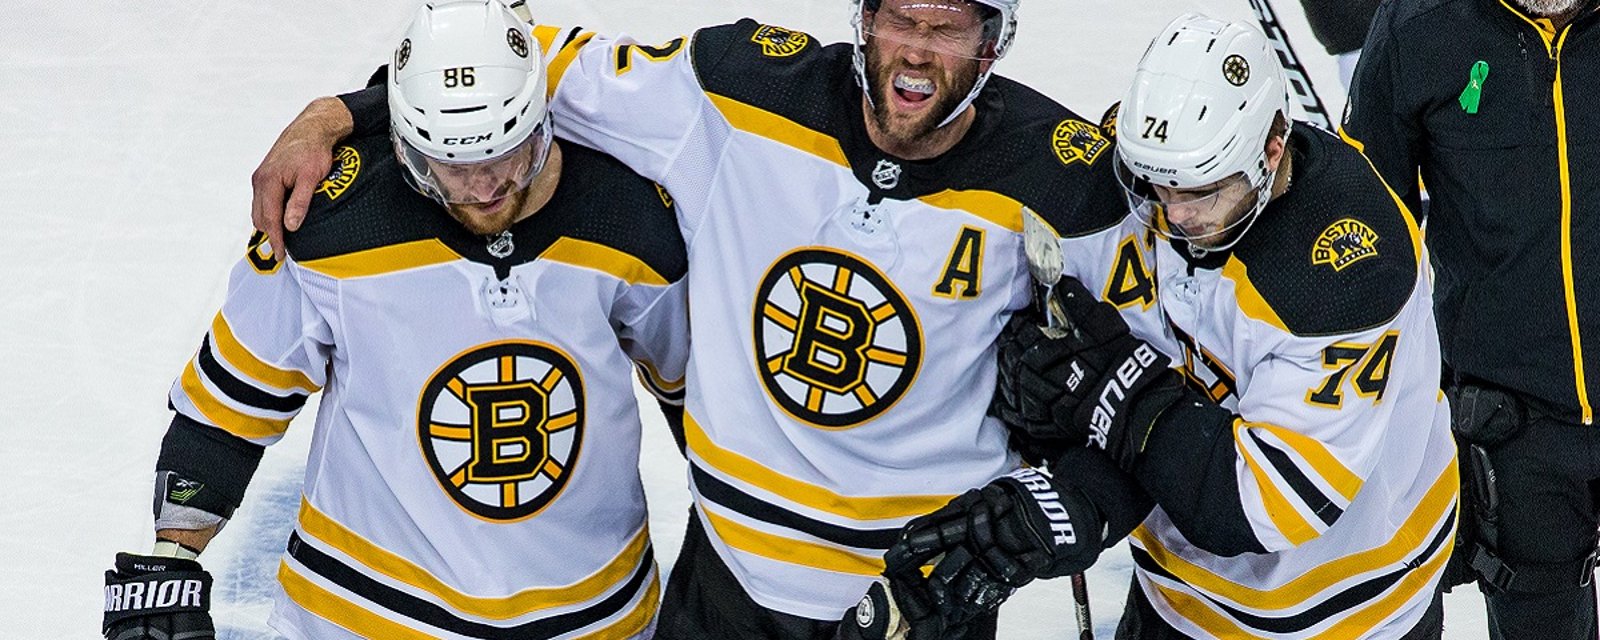 Rumor: David Backes may refuse to report to the AHL.